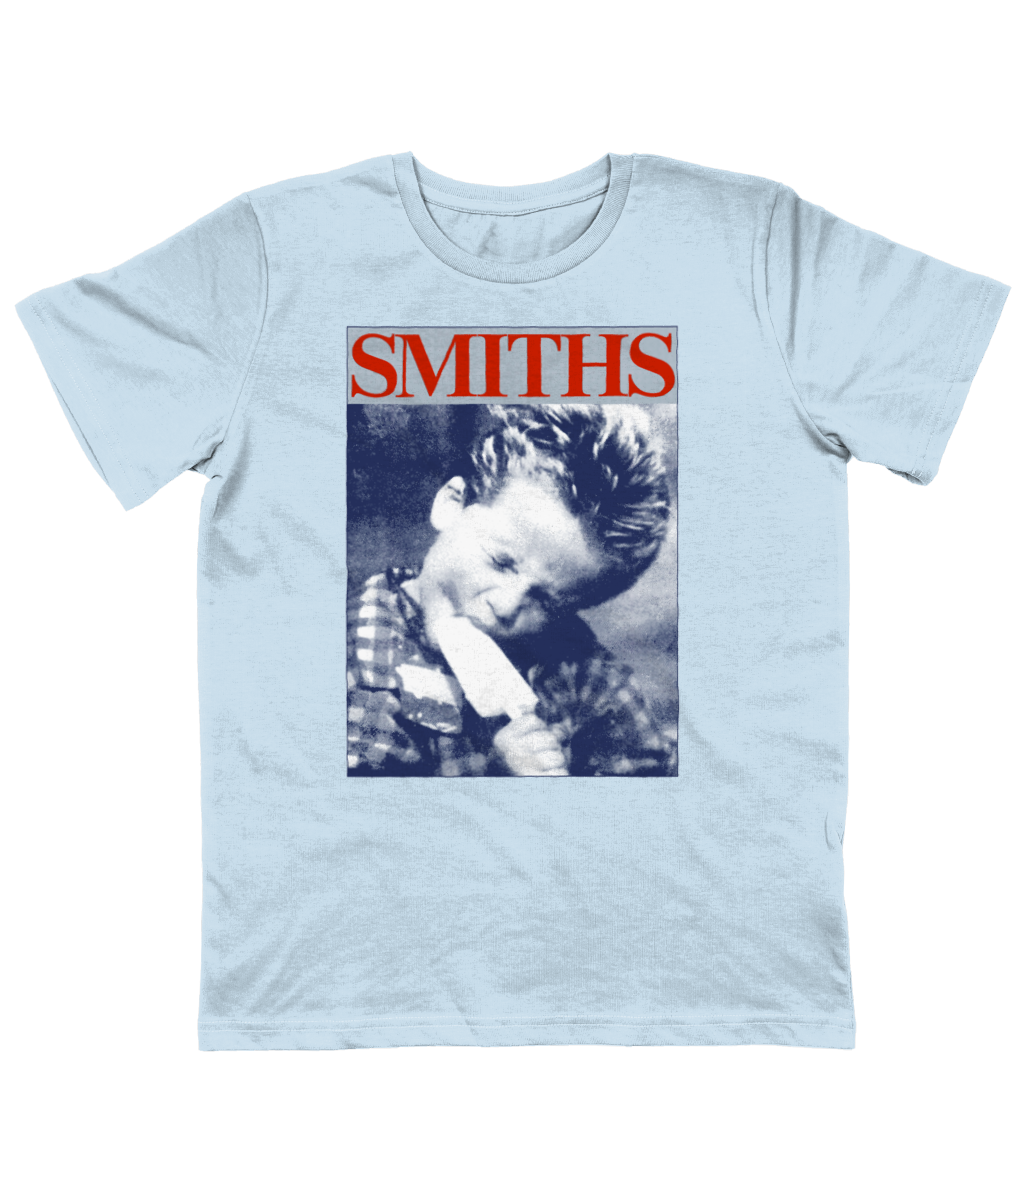 THE SMITHS - 'Boy With Lolly' - 1986 - Blue & Red - Vintage - Kids